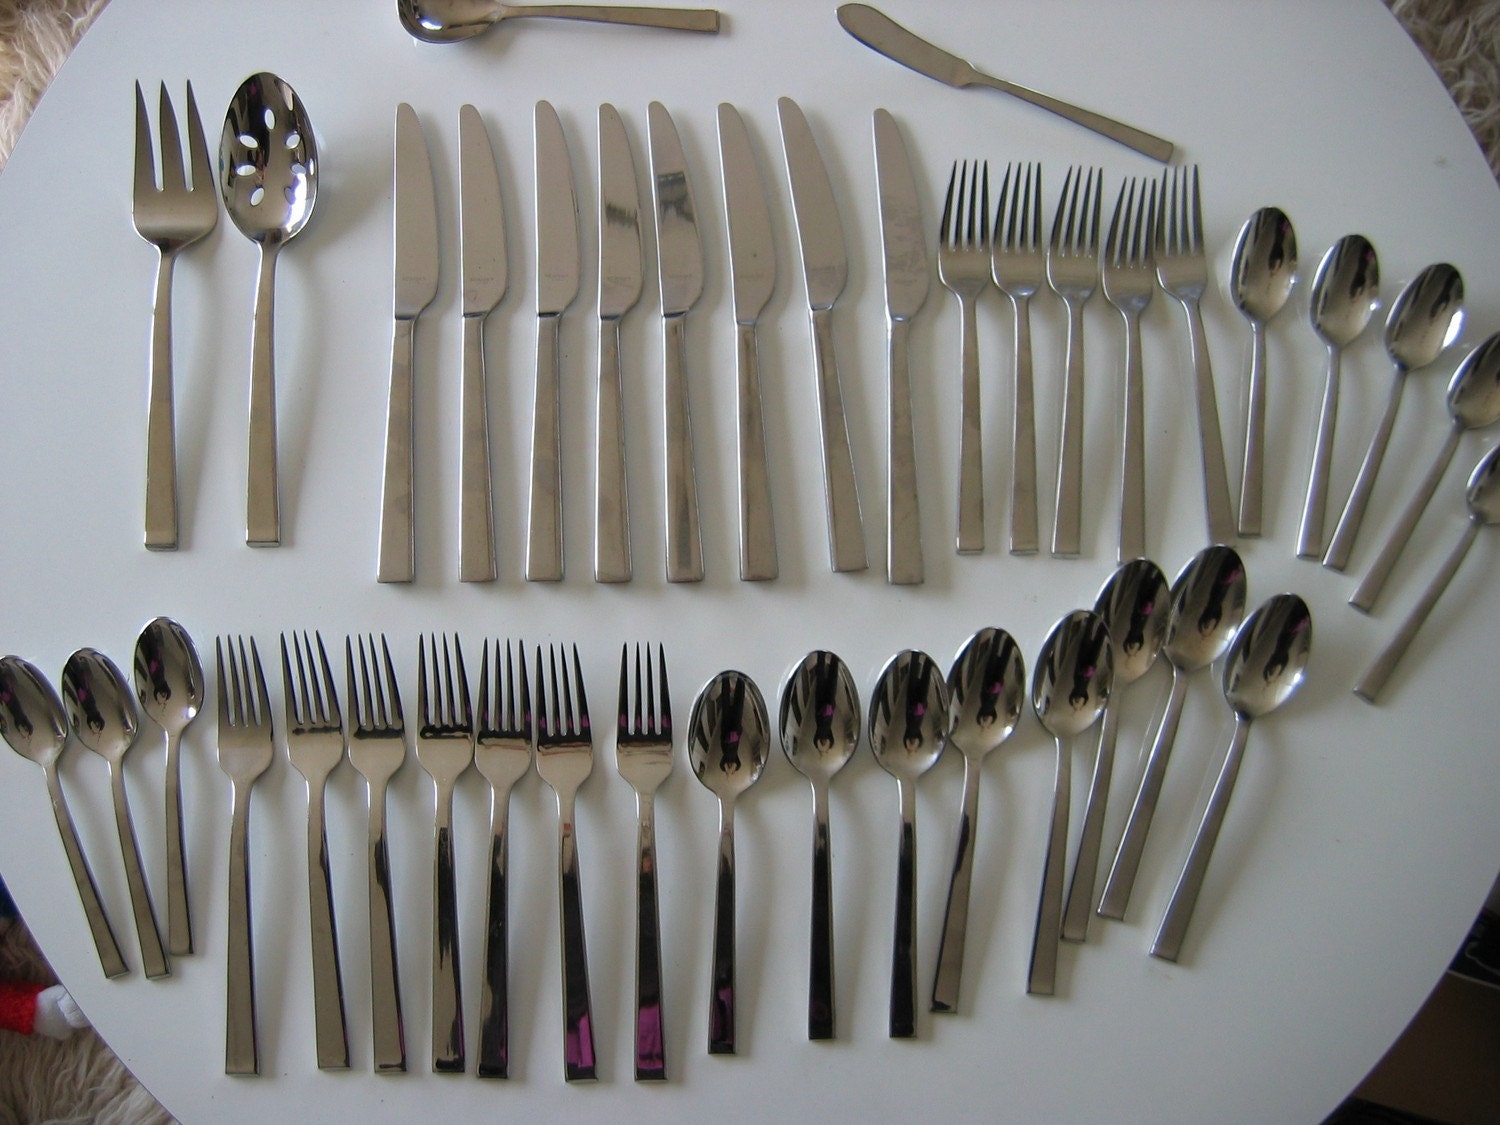 How do you identify discontinued Oneida stainless flatware?